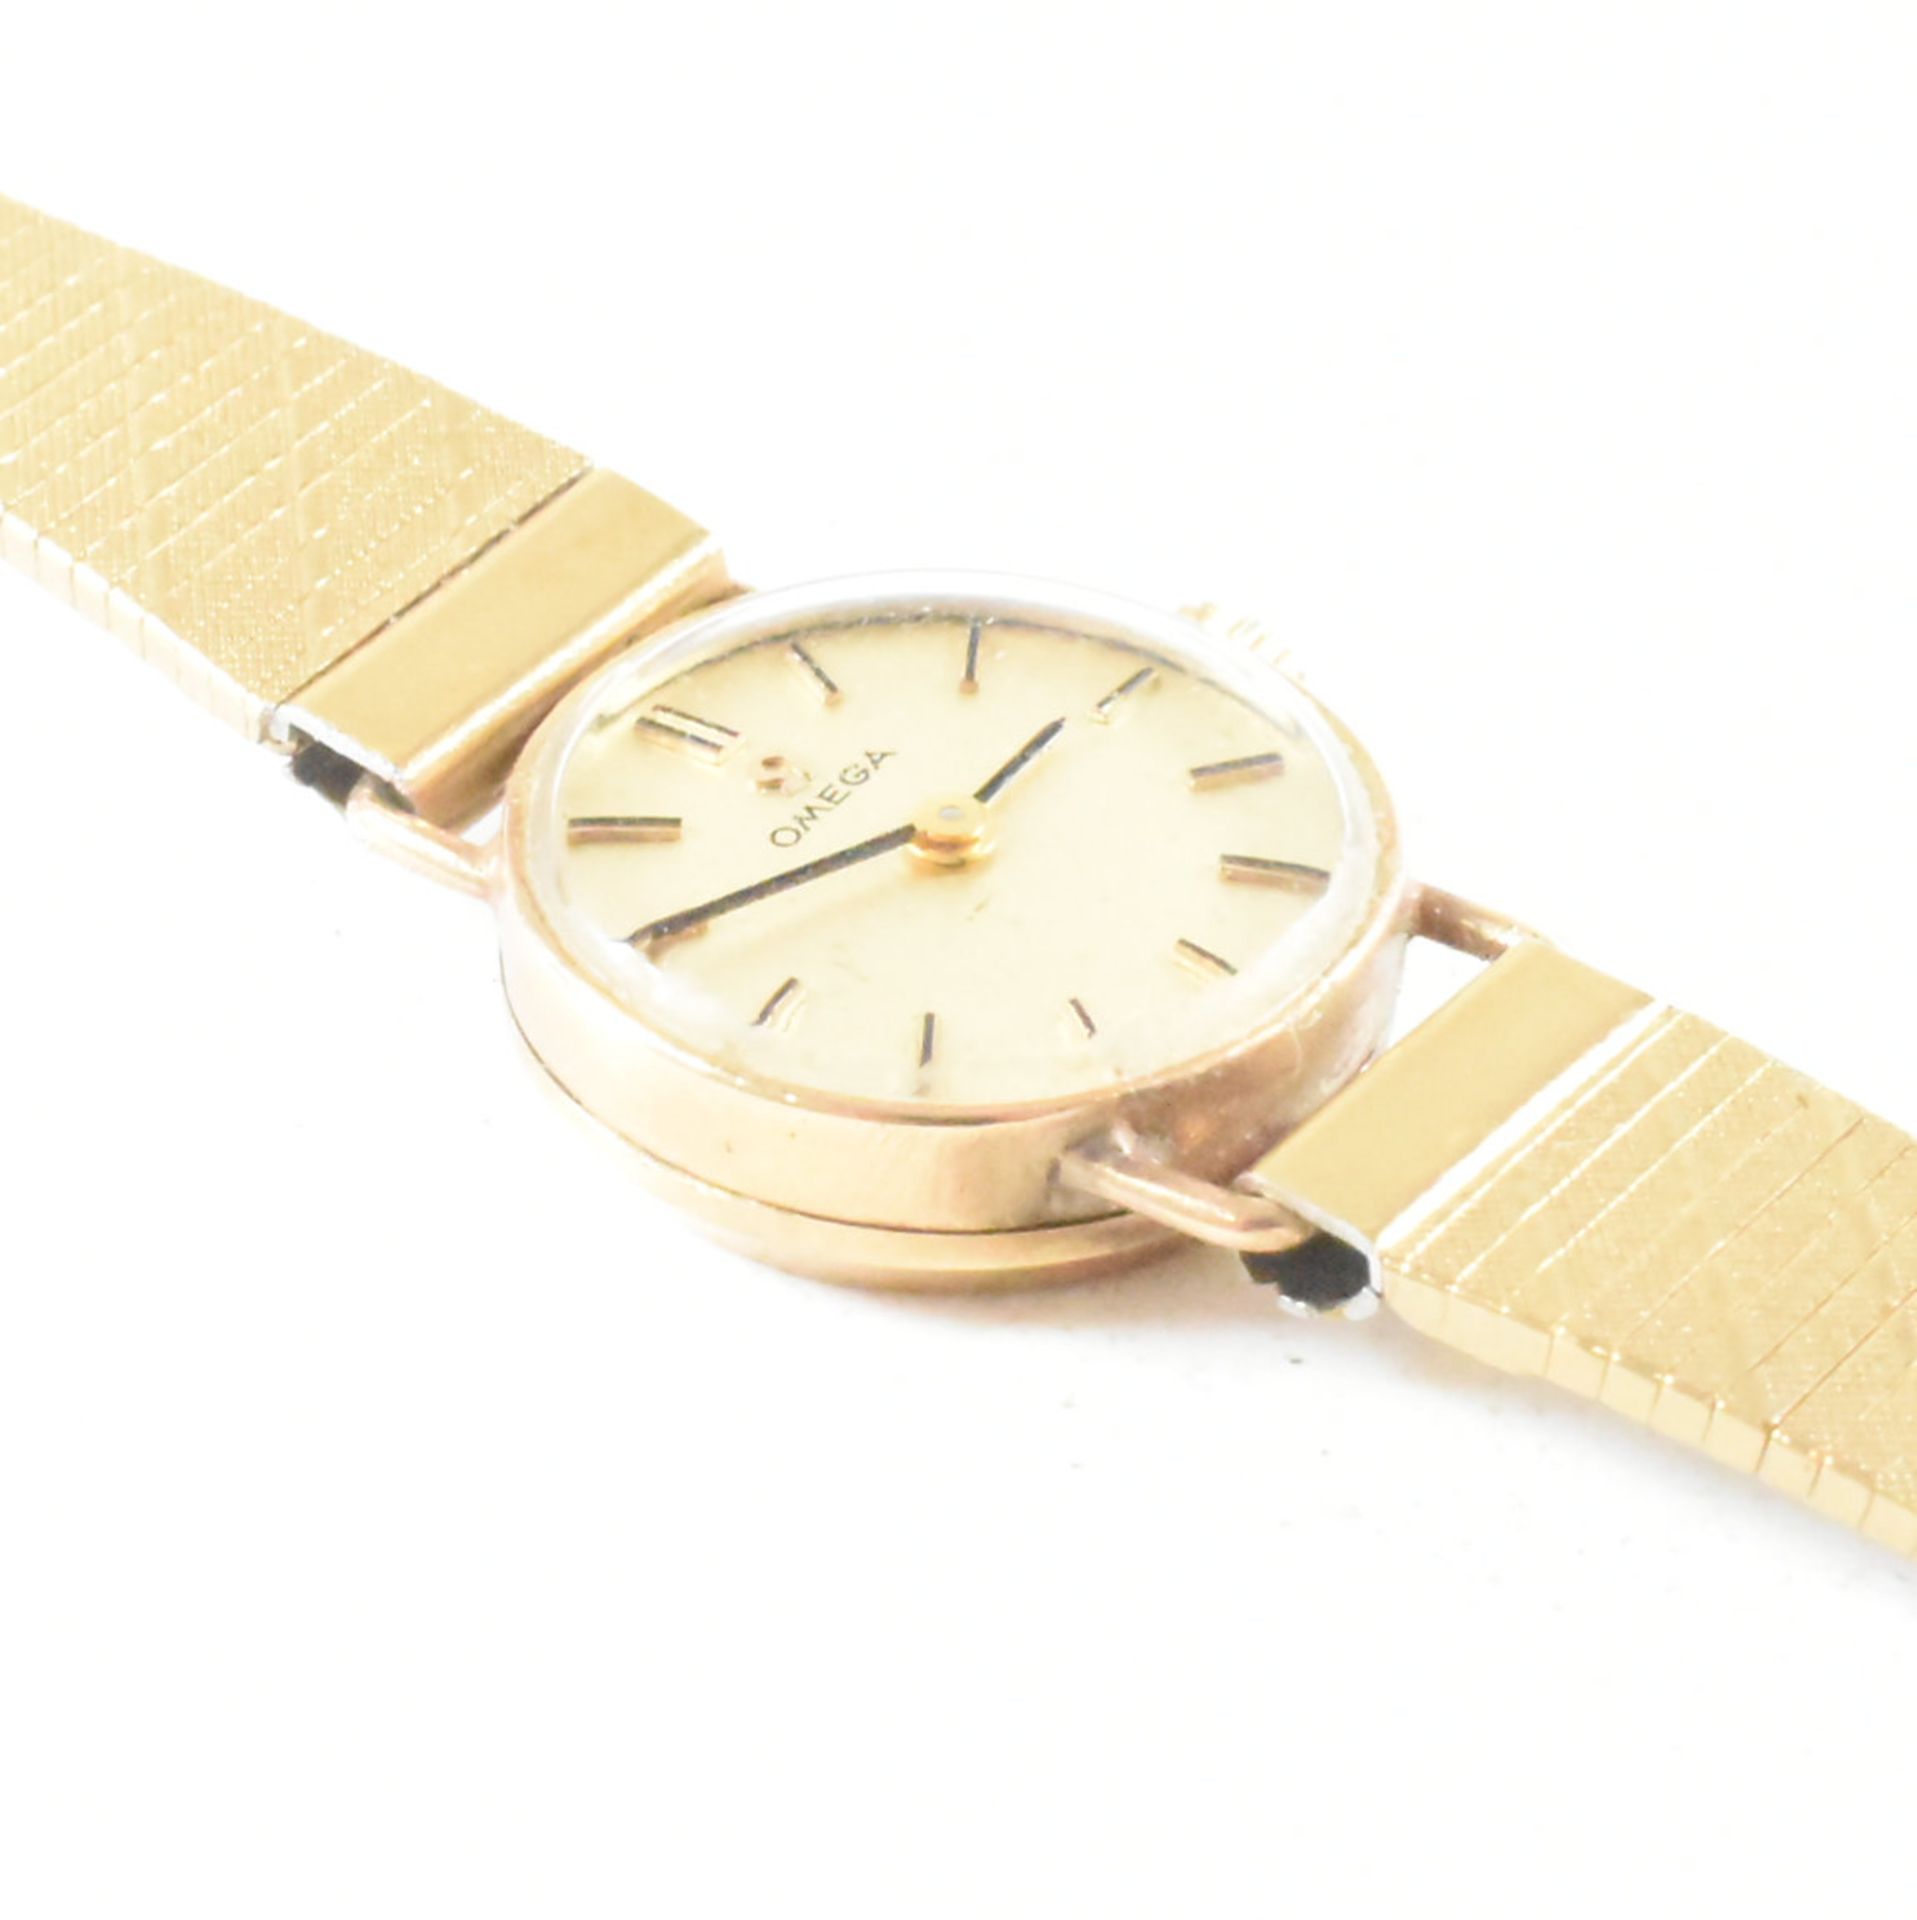 OMEGA HALLMARKED 9CT GOLD & STAINLESS STEEL COCKTAIL WATCH - Image 4 of 8